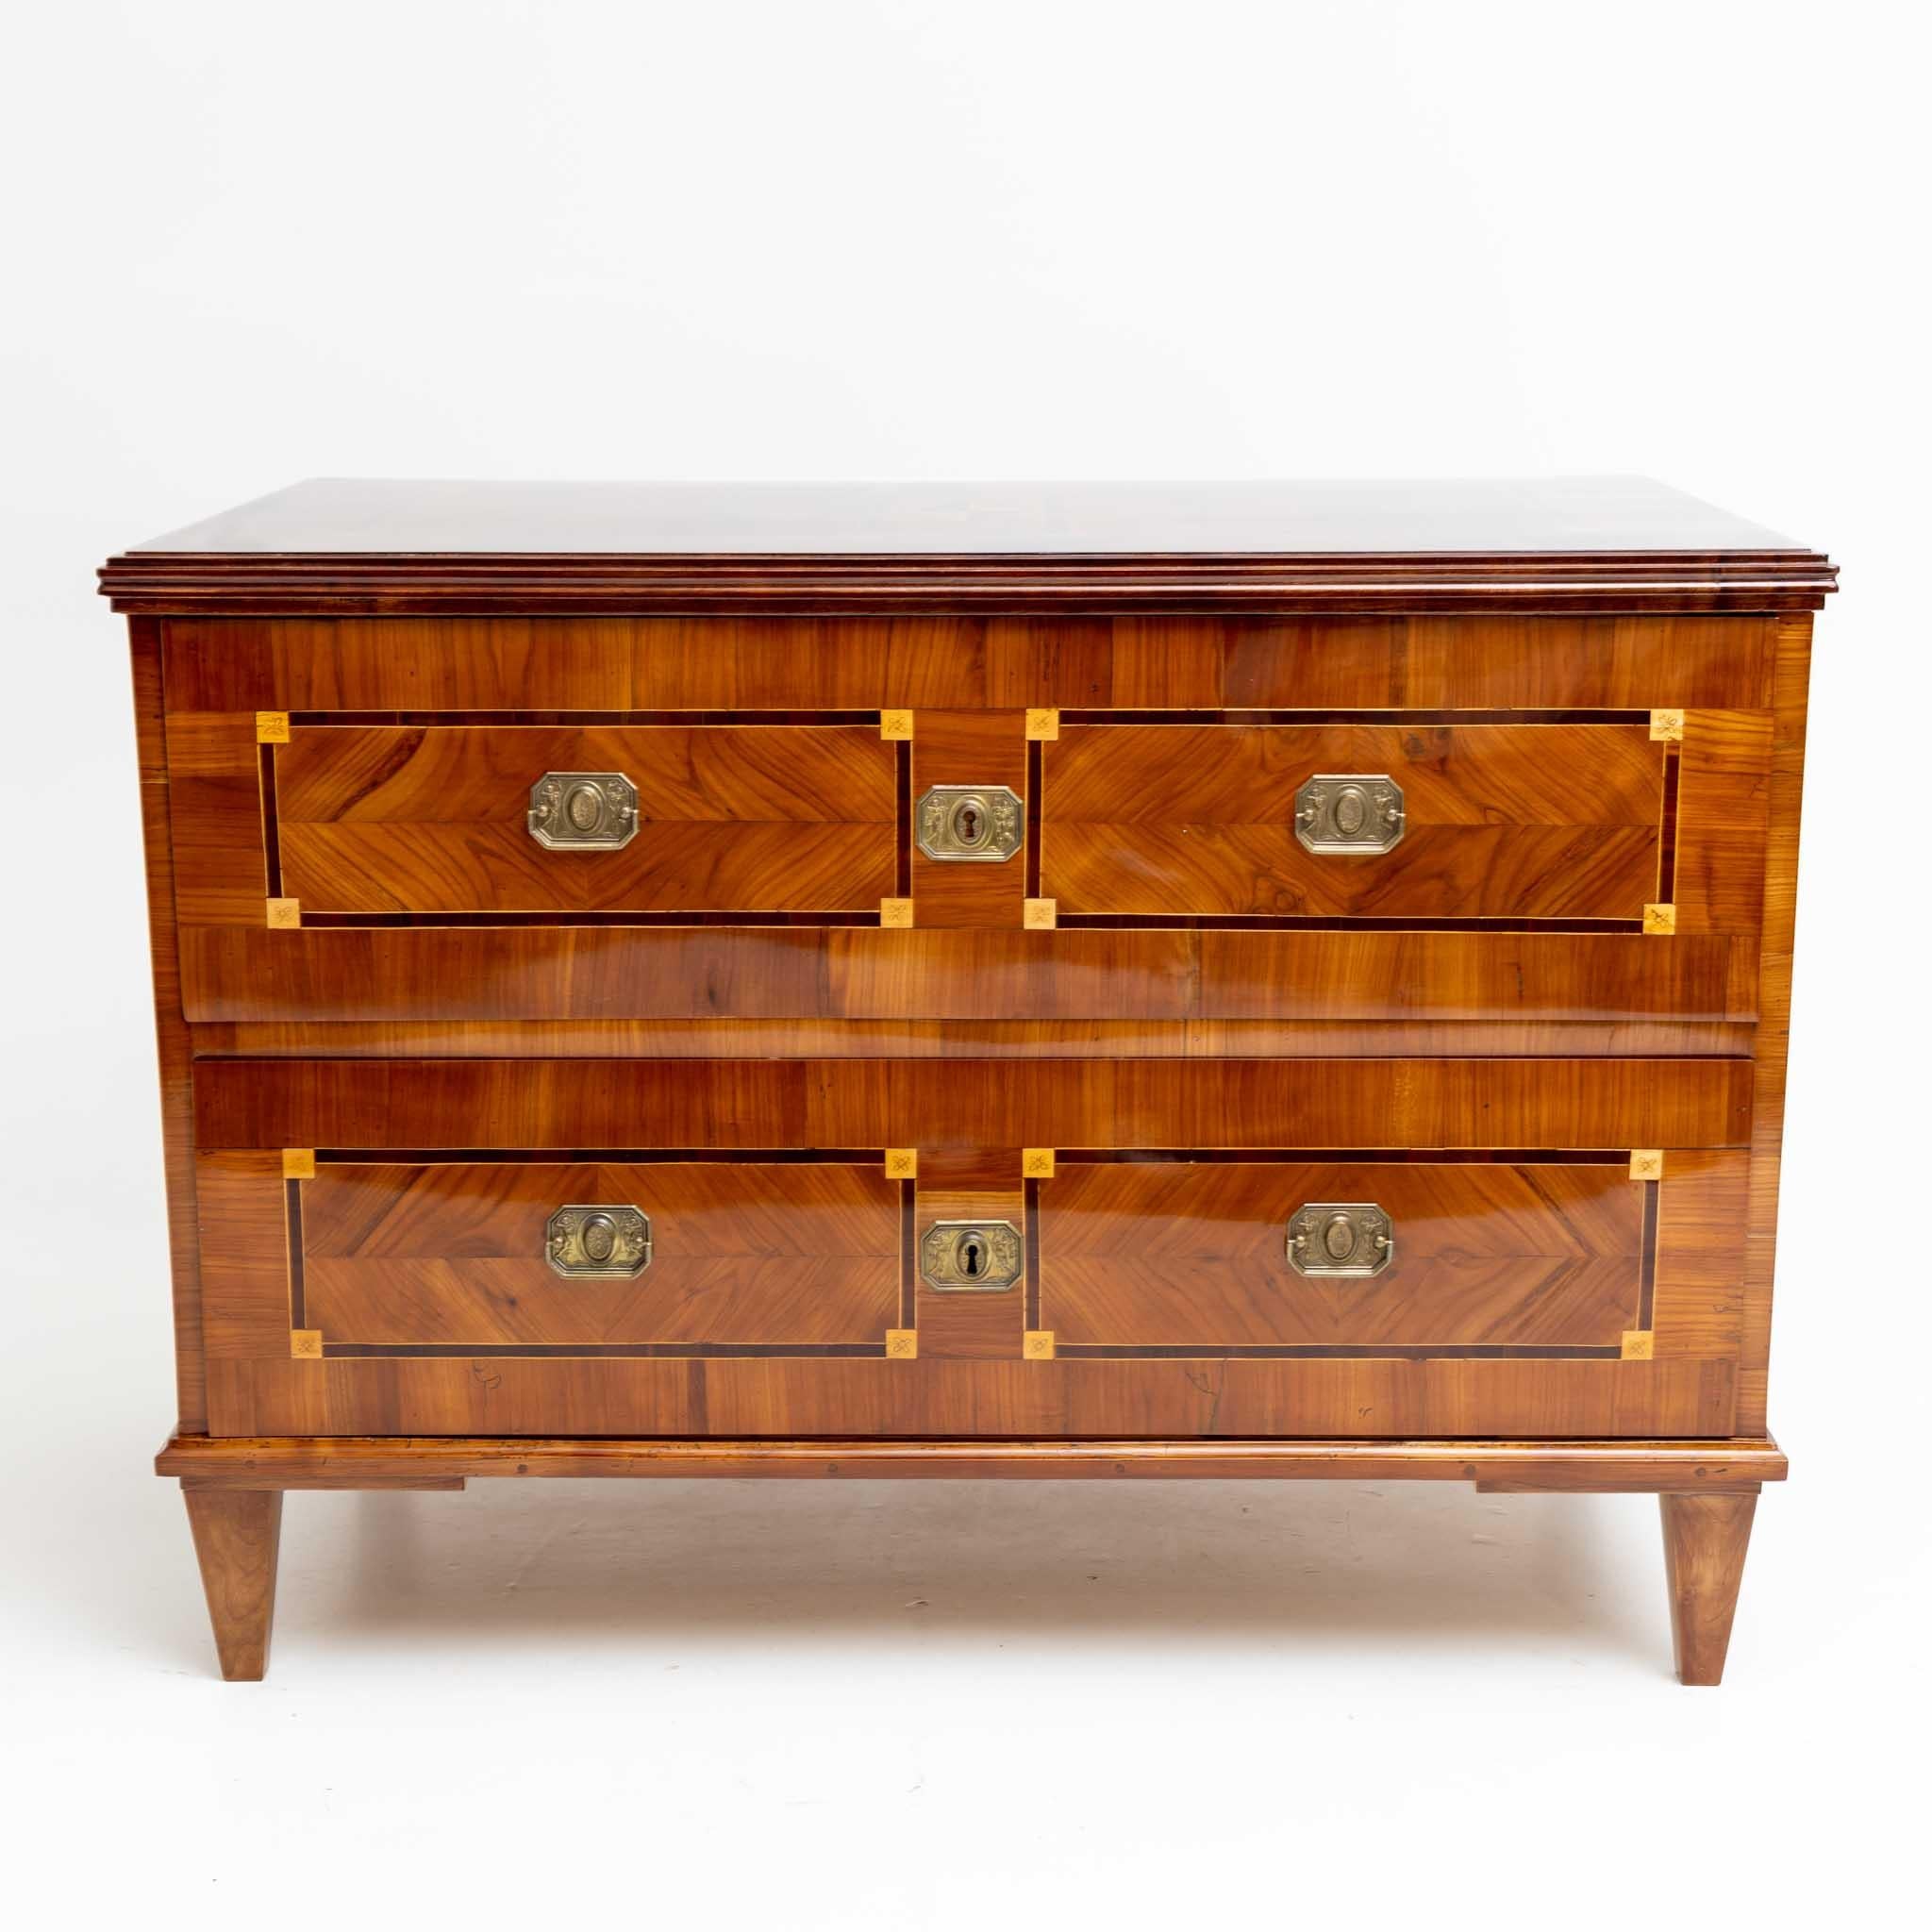 Louis Seize chest of drawers with two drawers and square pointed feet. The chest of drawers is veneered in cherry and has framing decorations on the surfaces. The chest of drawers has been professionally restored and polished by hand.